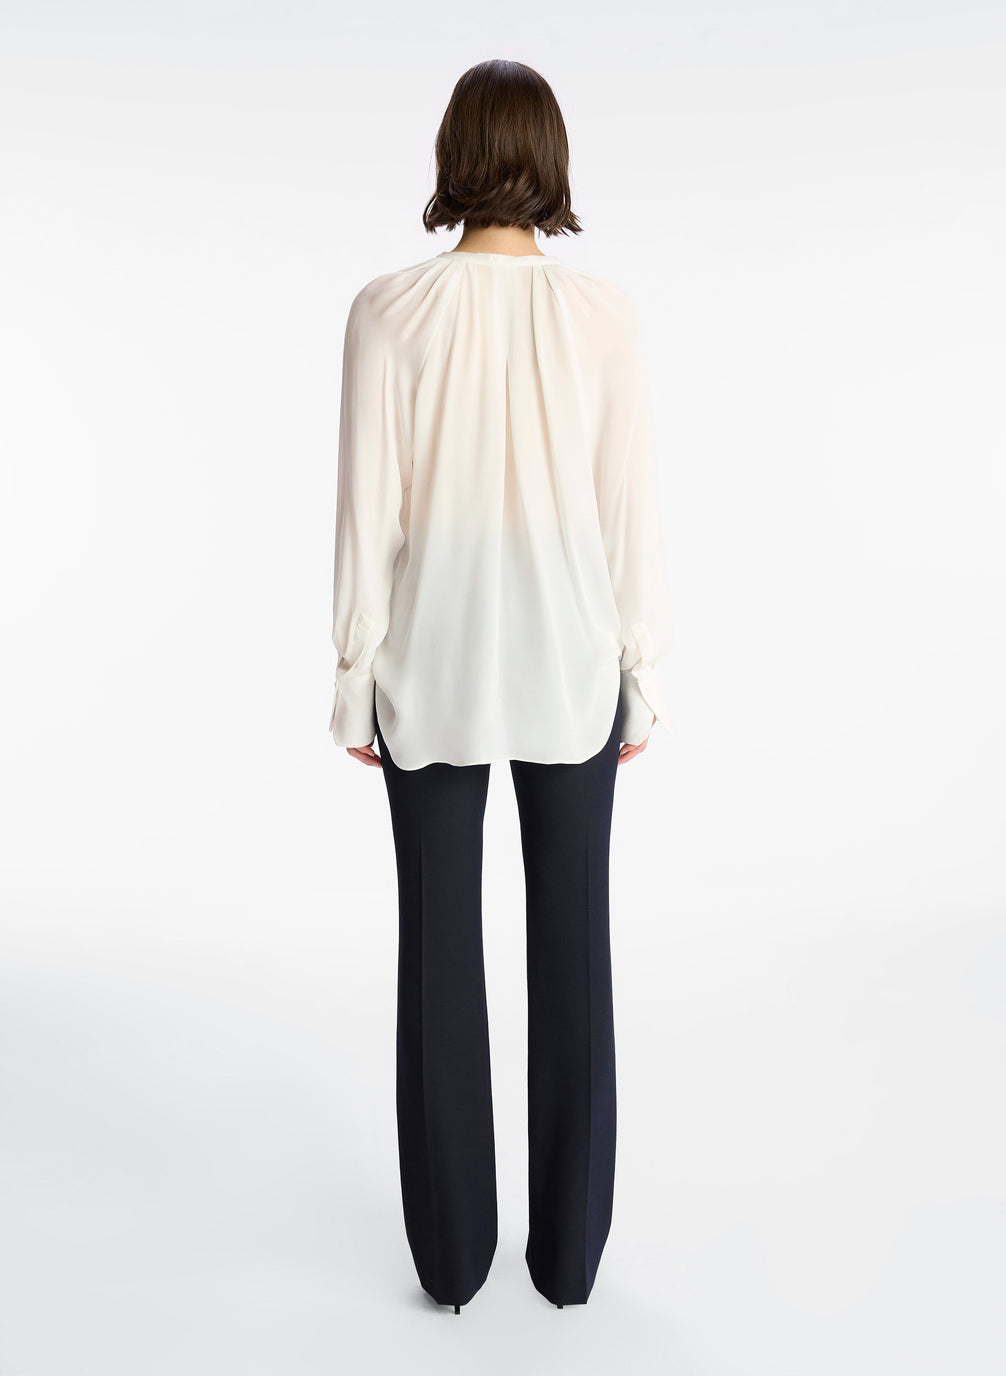 back view of woman wearing cream long sleeve v neck blouse and navy blue pants